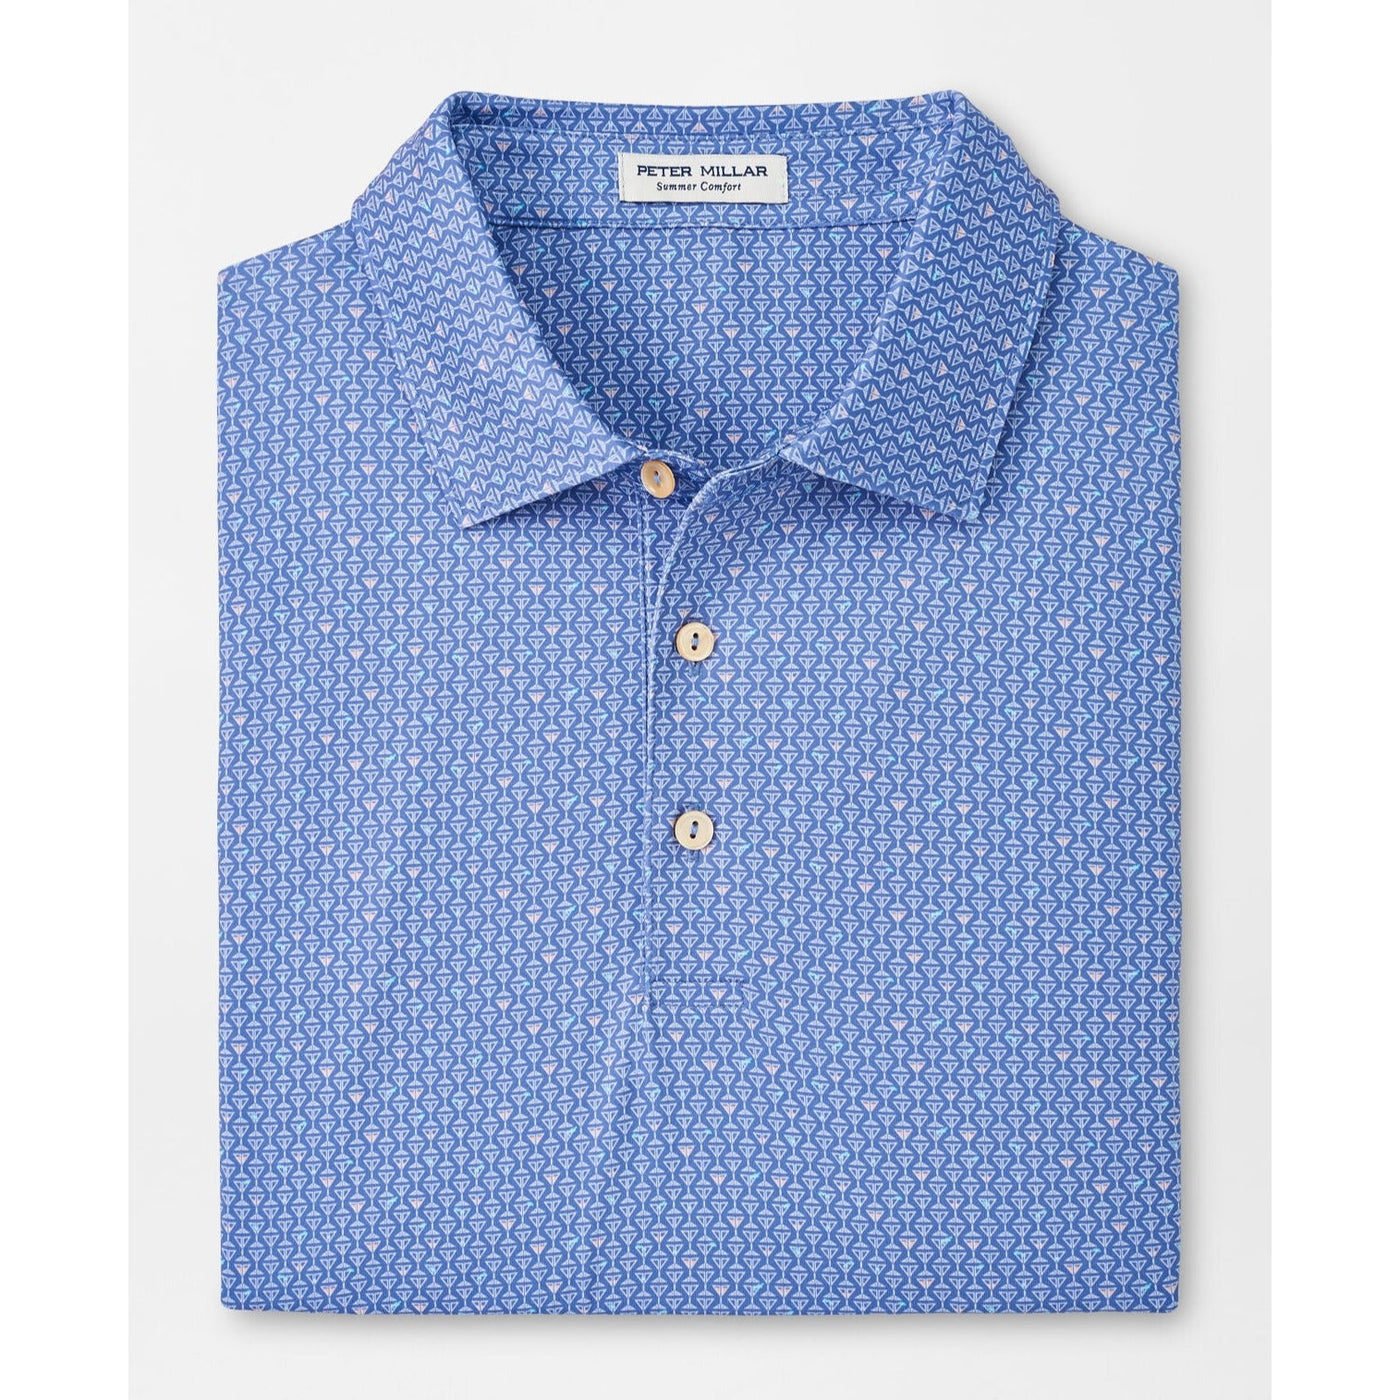 Peter Millar Shaken, Not Stirred Performance Jersey Polo-Men's Clothing-Kevin's Fine Outdoor Gear & Apparel